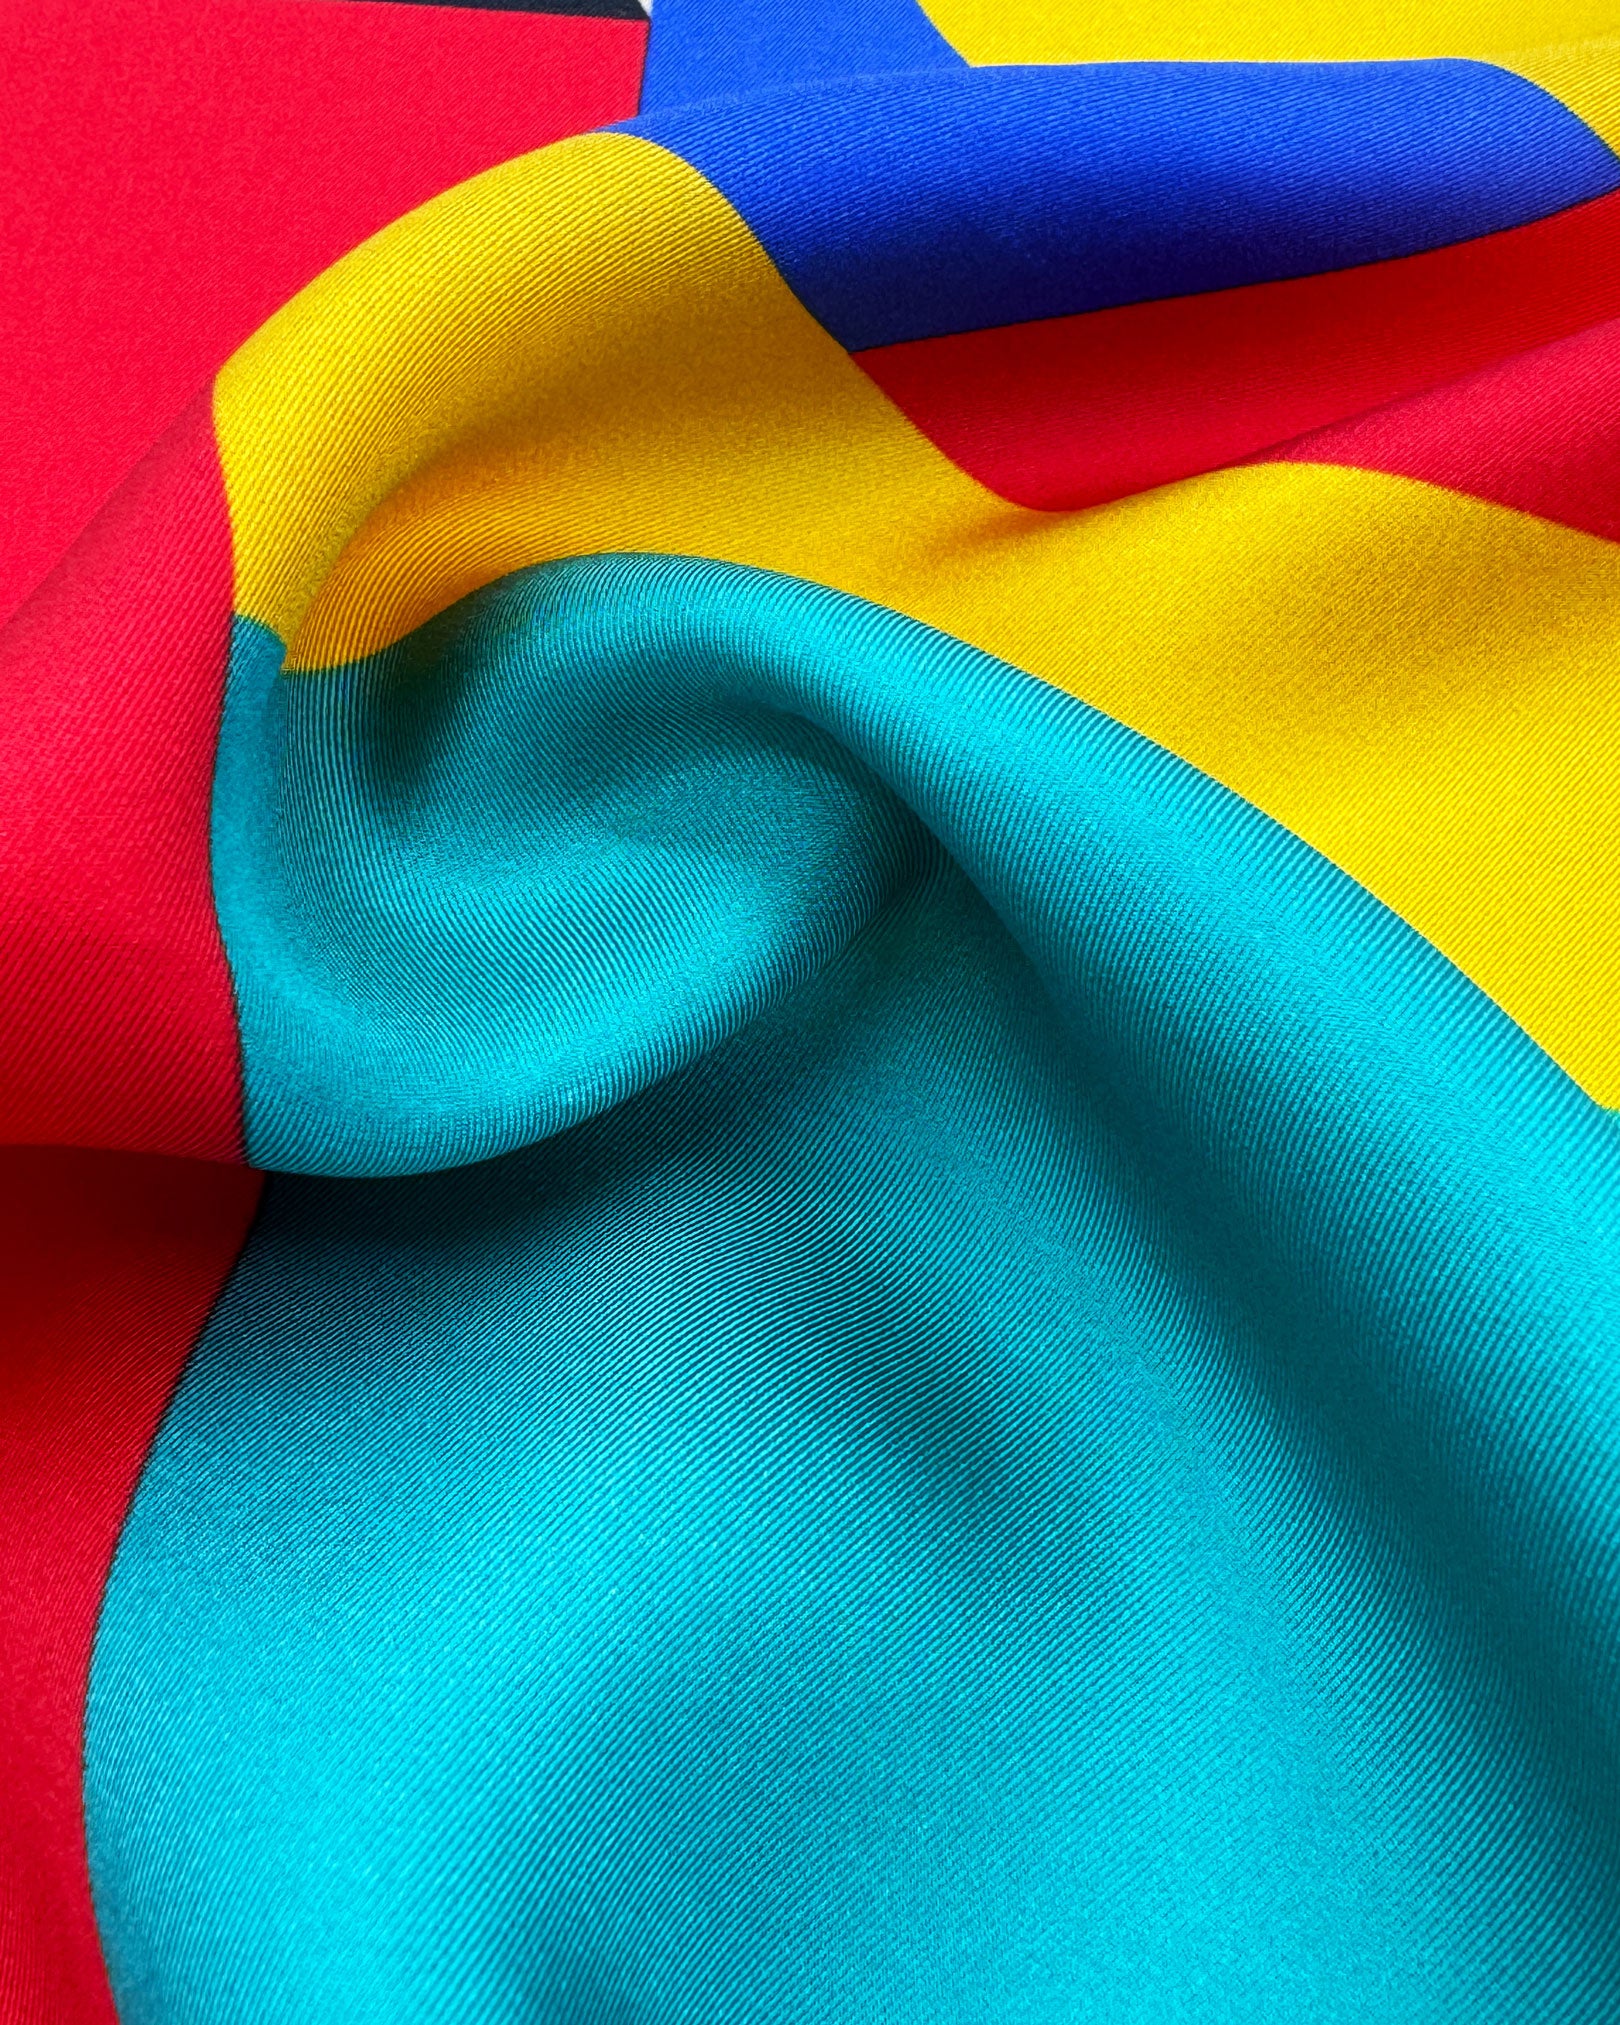 A ruffled close-up of the 'Munich' silk pocket square, presenting a closer view of the brightly coloured Bauhaus inspired patterns.